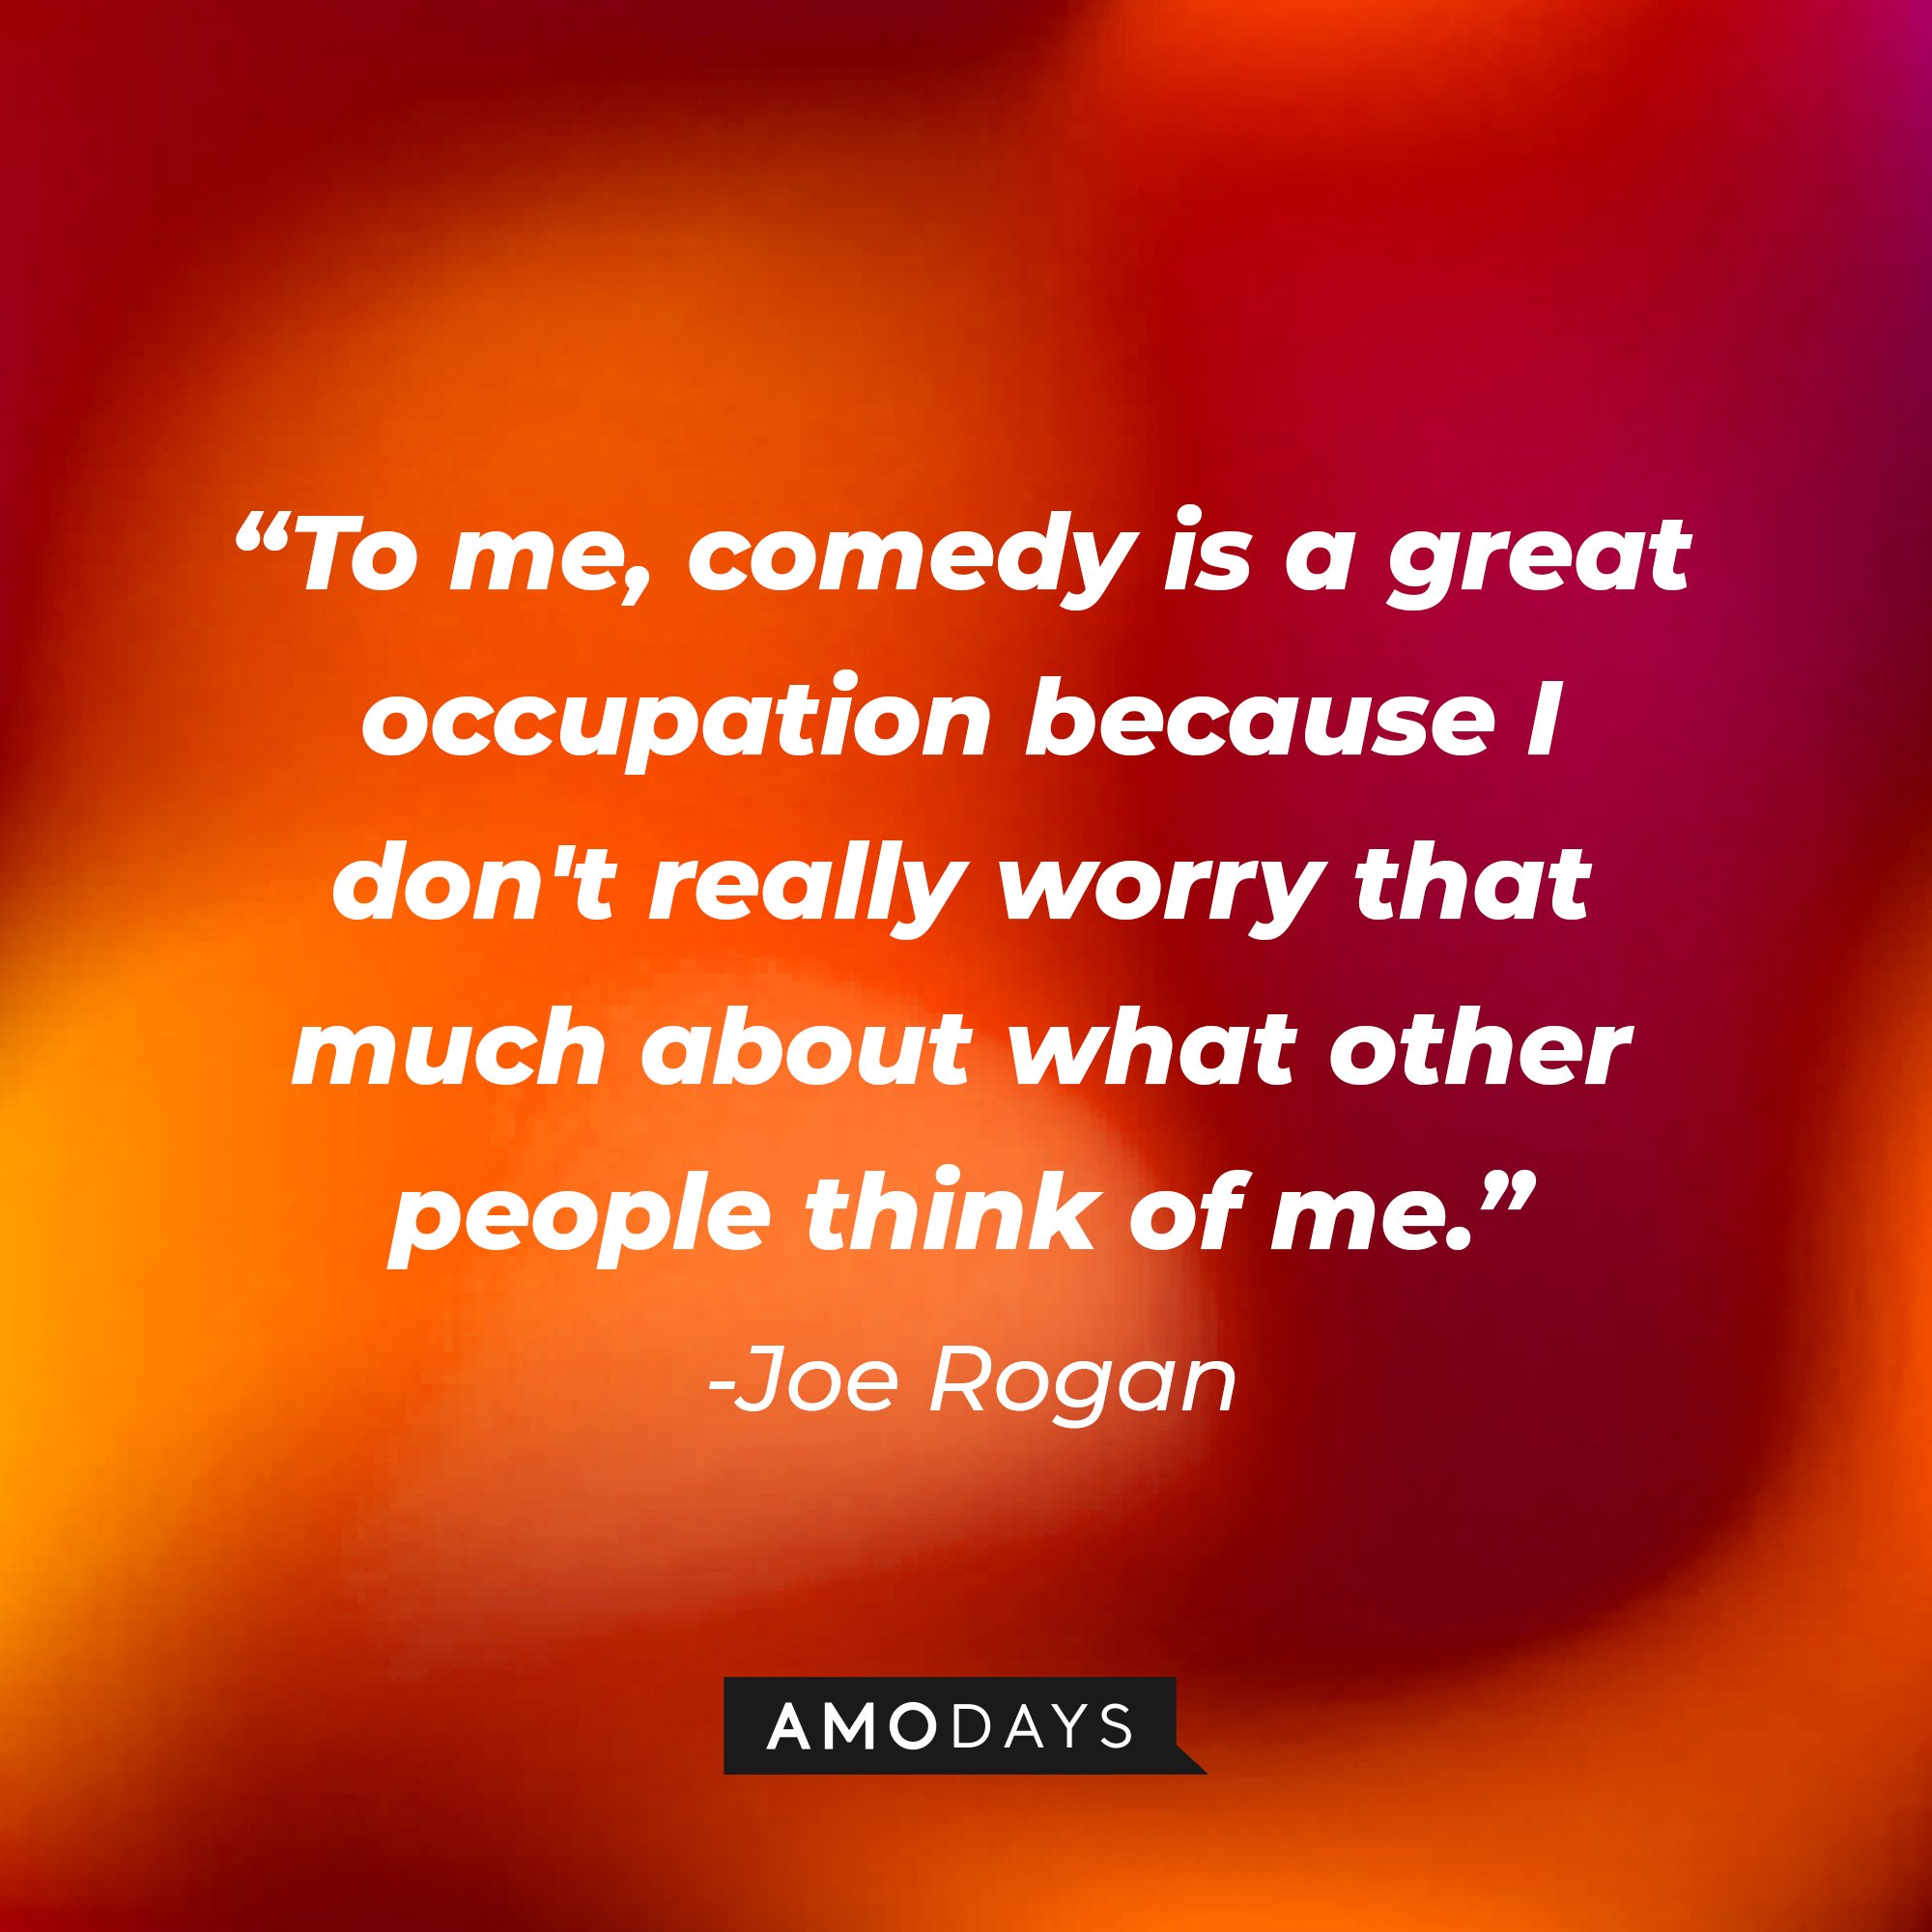 Joe Rogan's quote: "To me, comedy is a great occupation because I don't really worry that much about what other people think of me." | Image: AmoDays